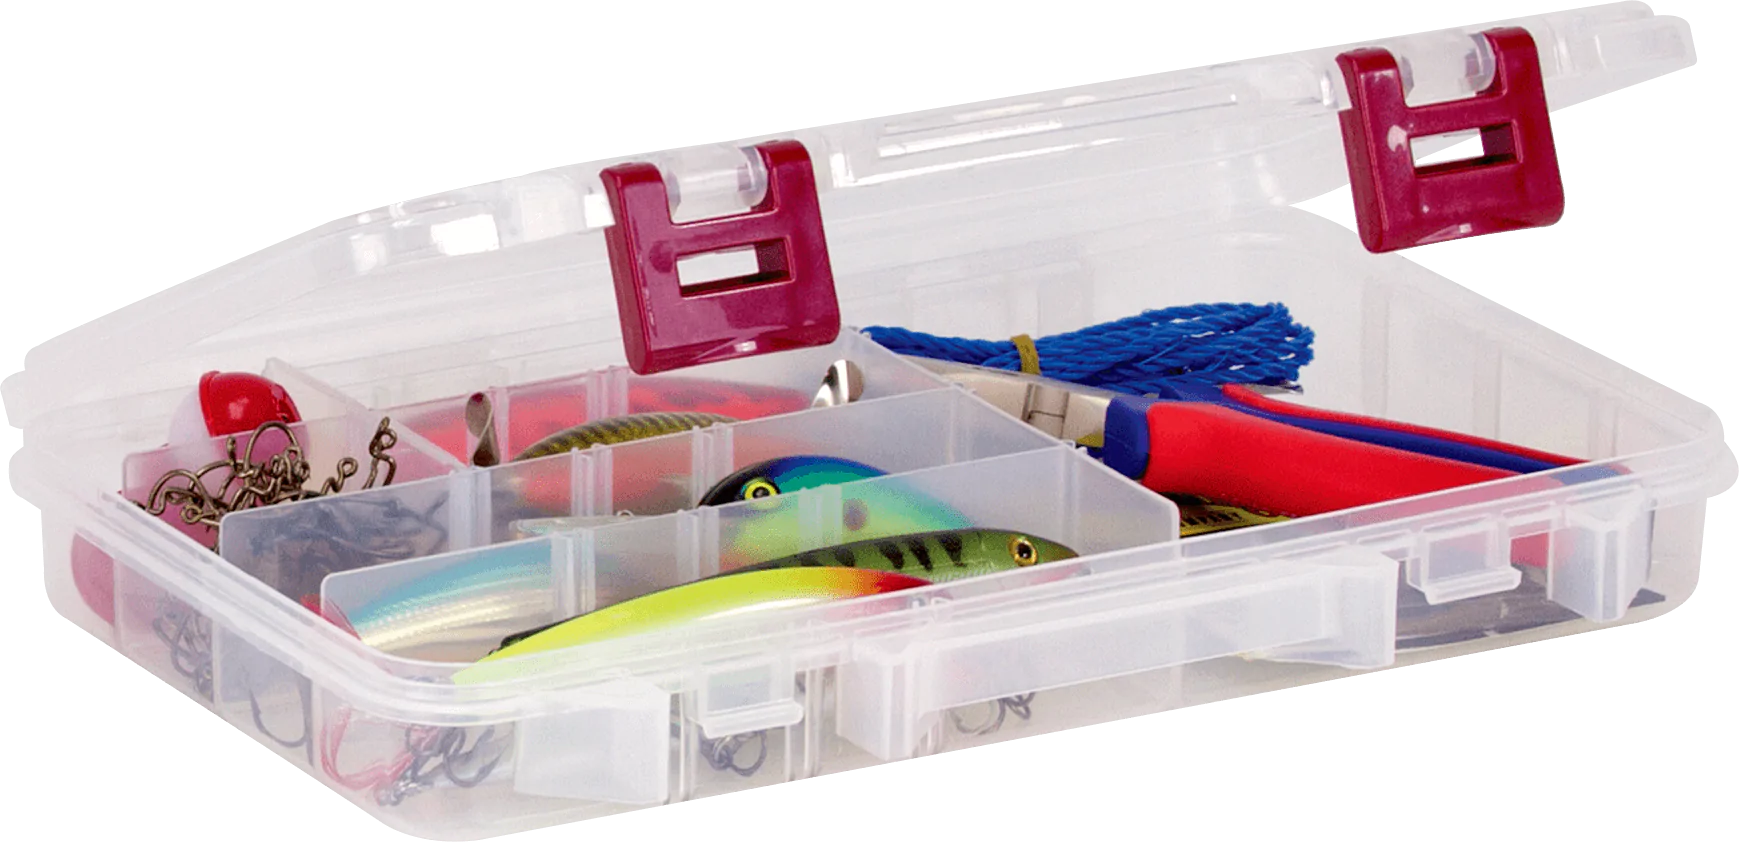 PLANO 3600 TWO-TIERED STOWAWAY TACKLE BOX